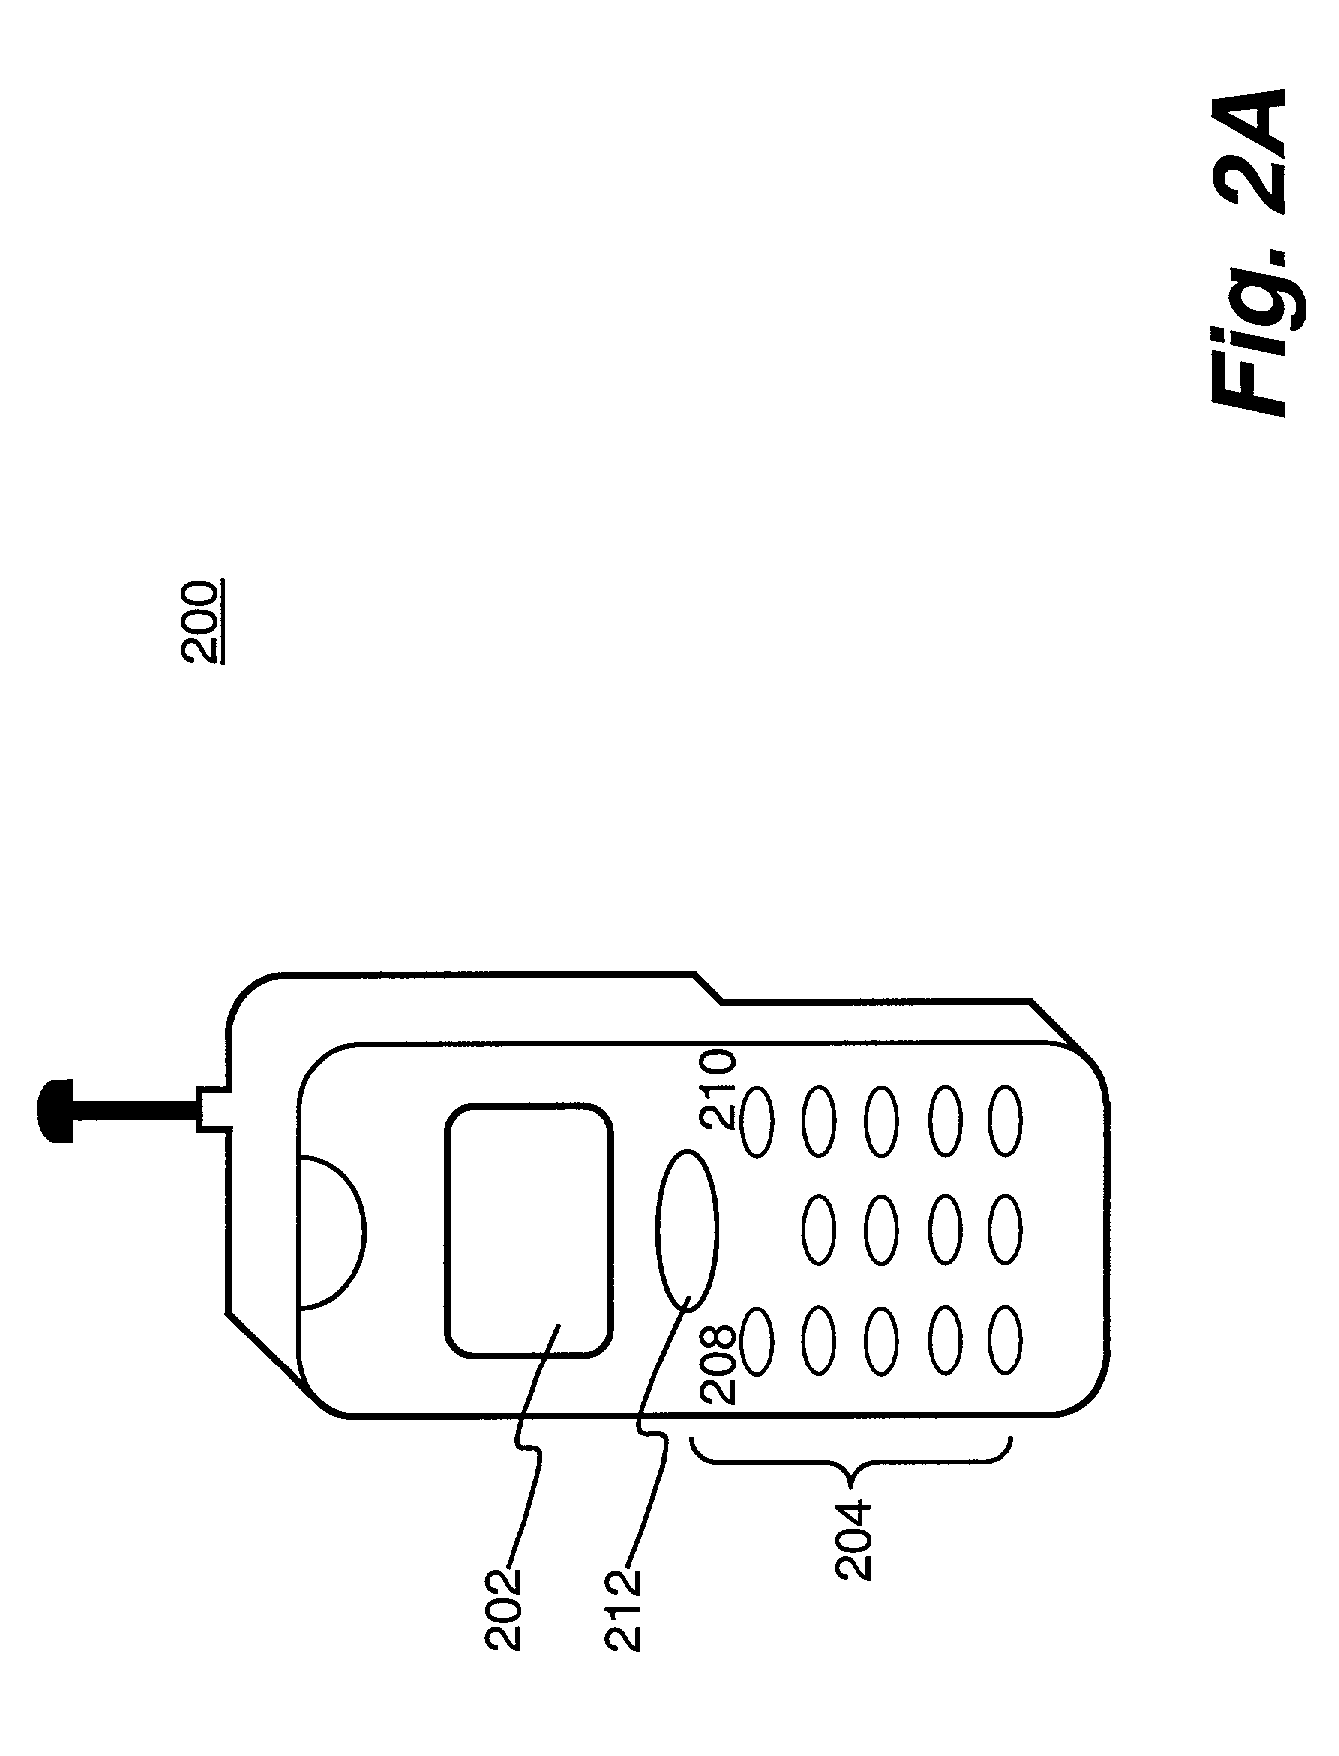 Method and architecture for interactive two-way communication devices to interact with a network